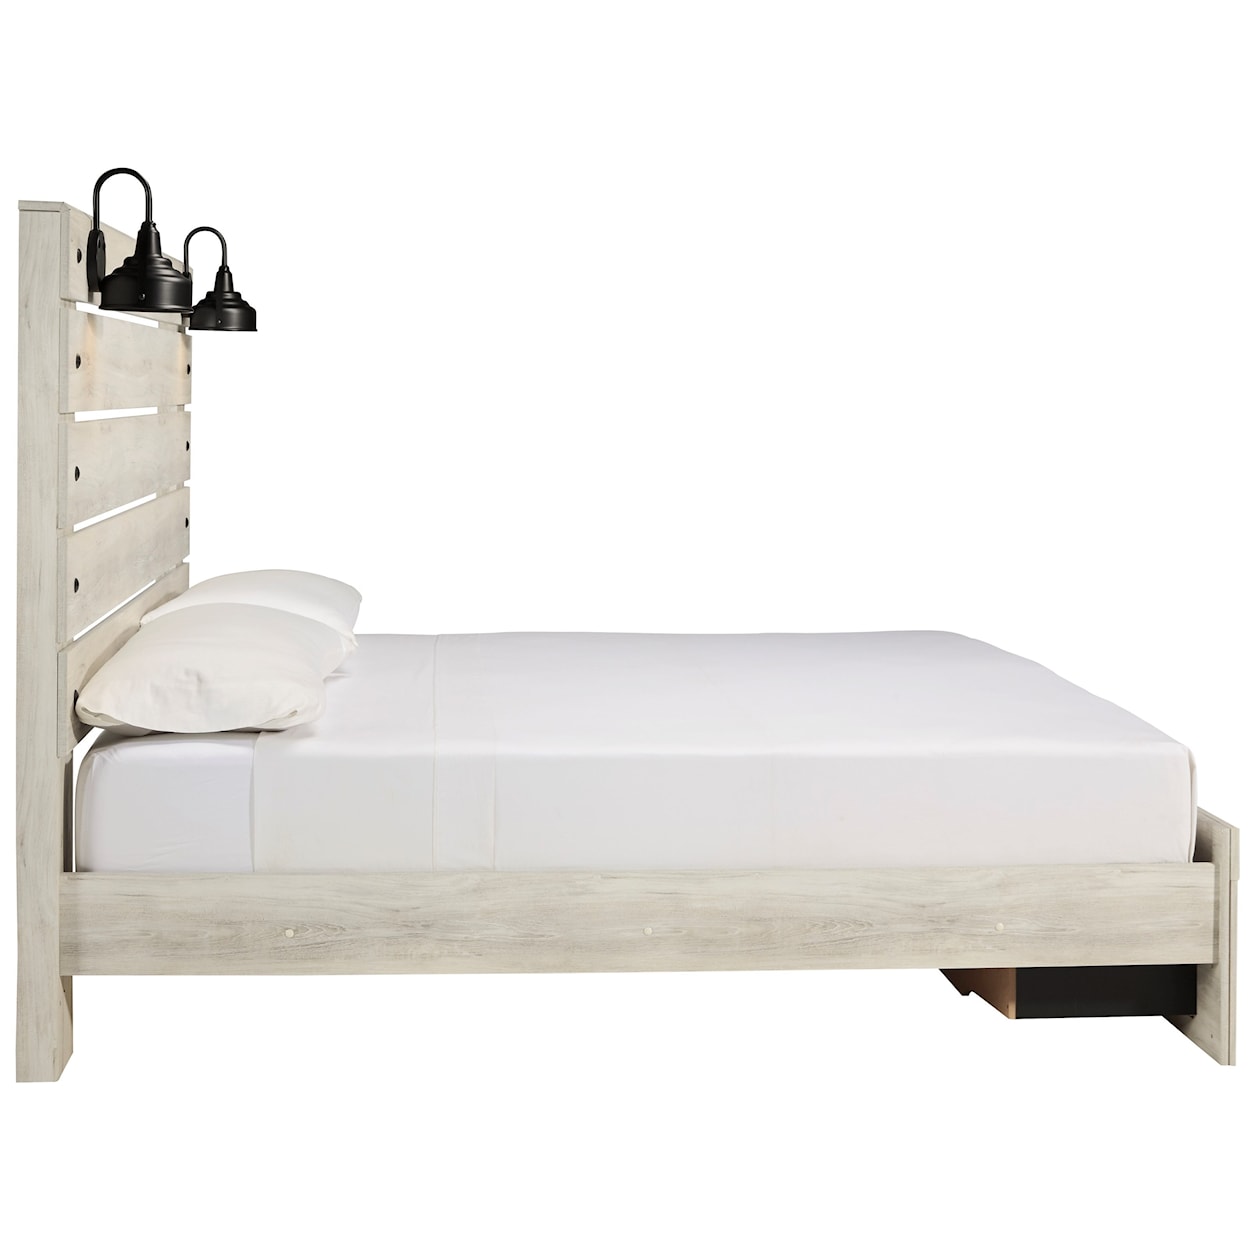 Signature Design by Ashley Cambeck King Bed w/ Lights & Footboard Drawers